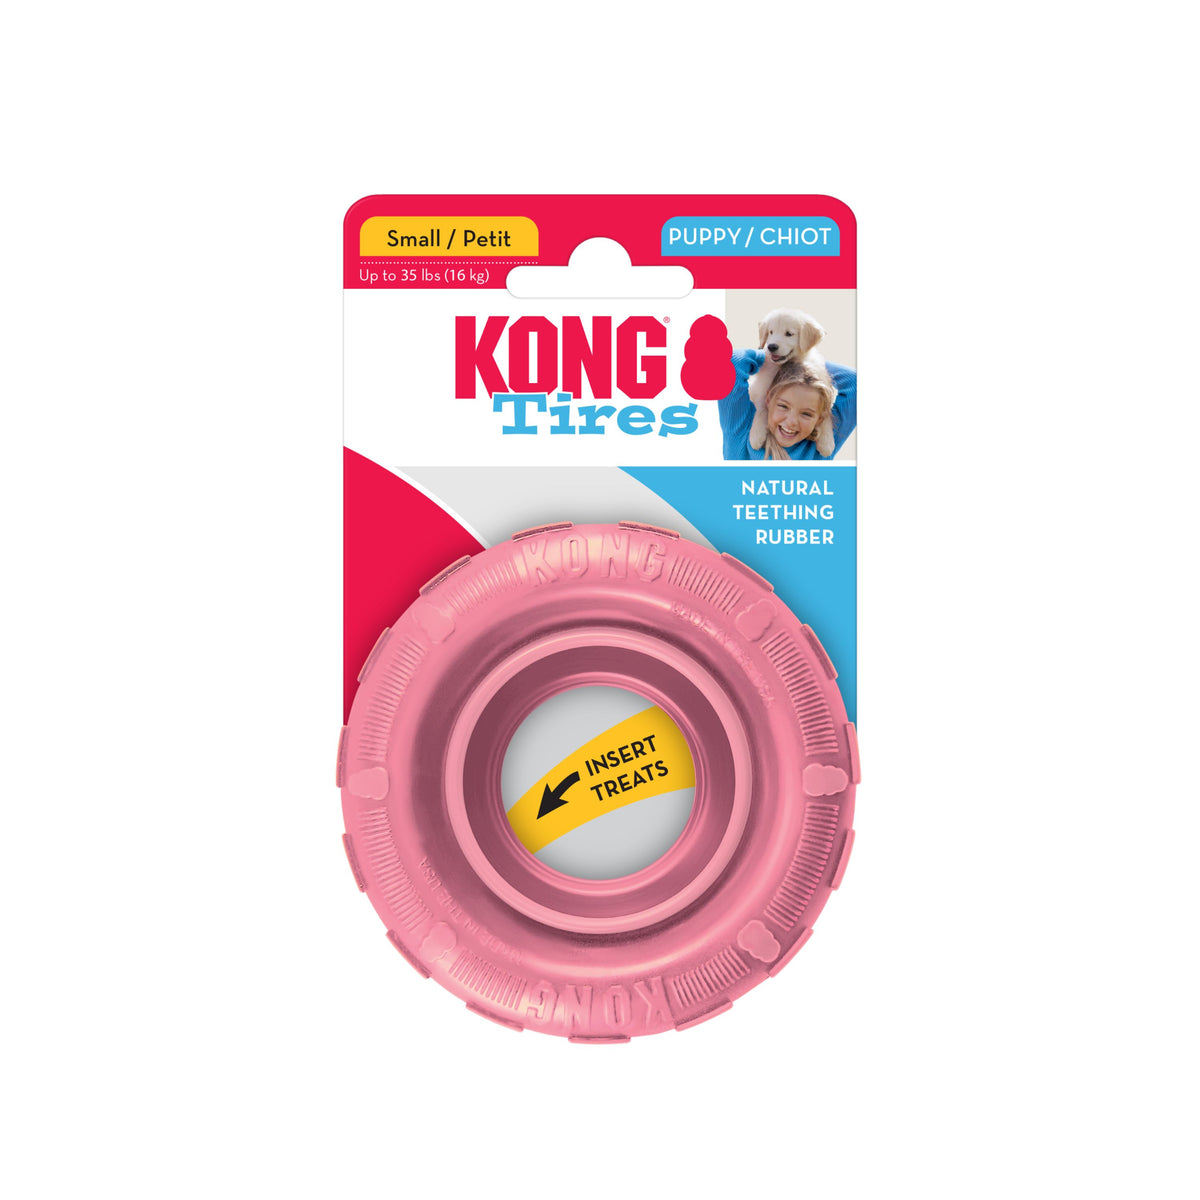 KONG Puppy Tires